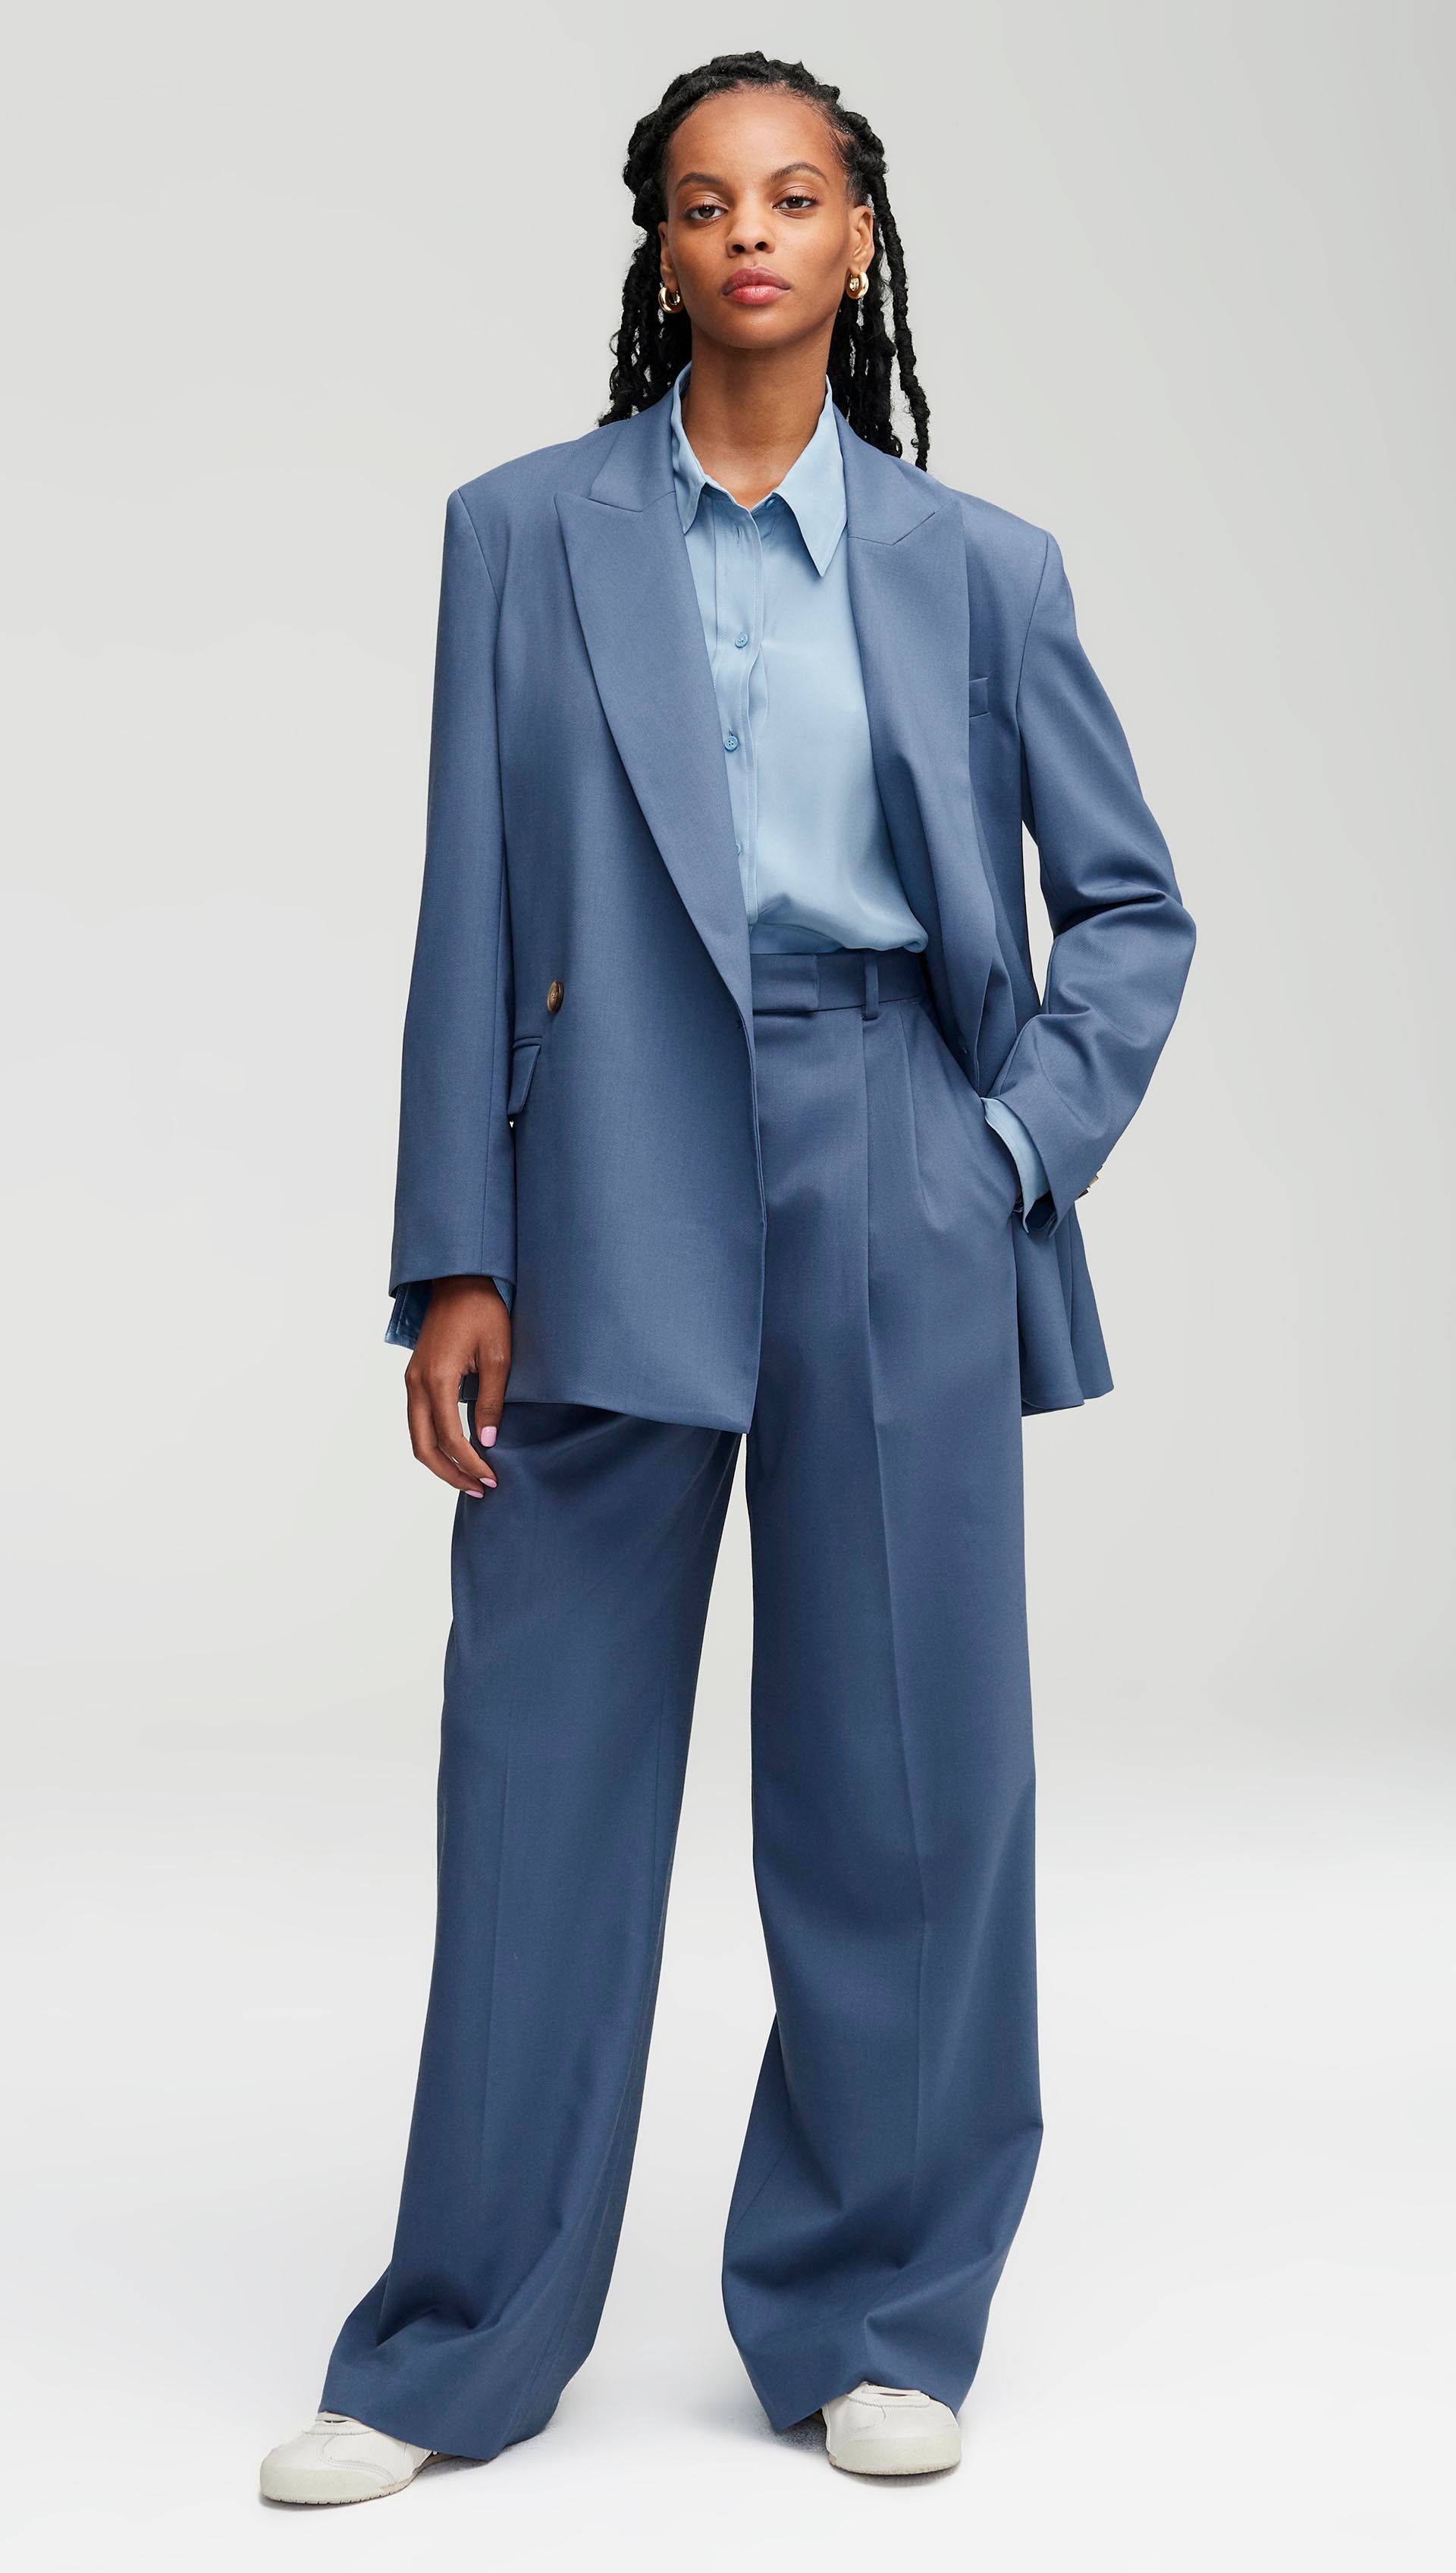 The Best Women's Suits for the Office